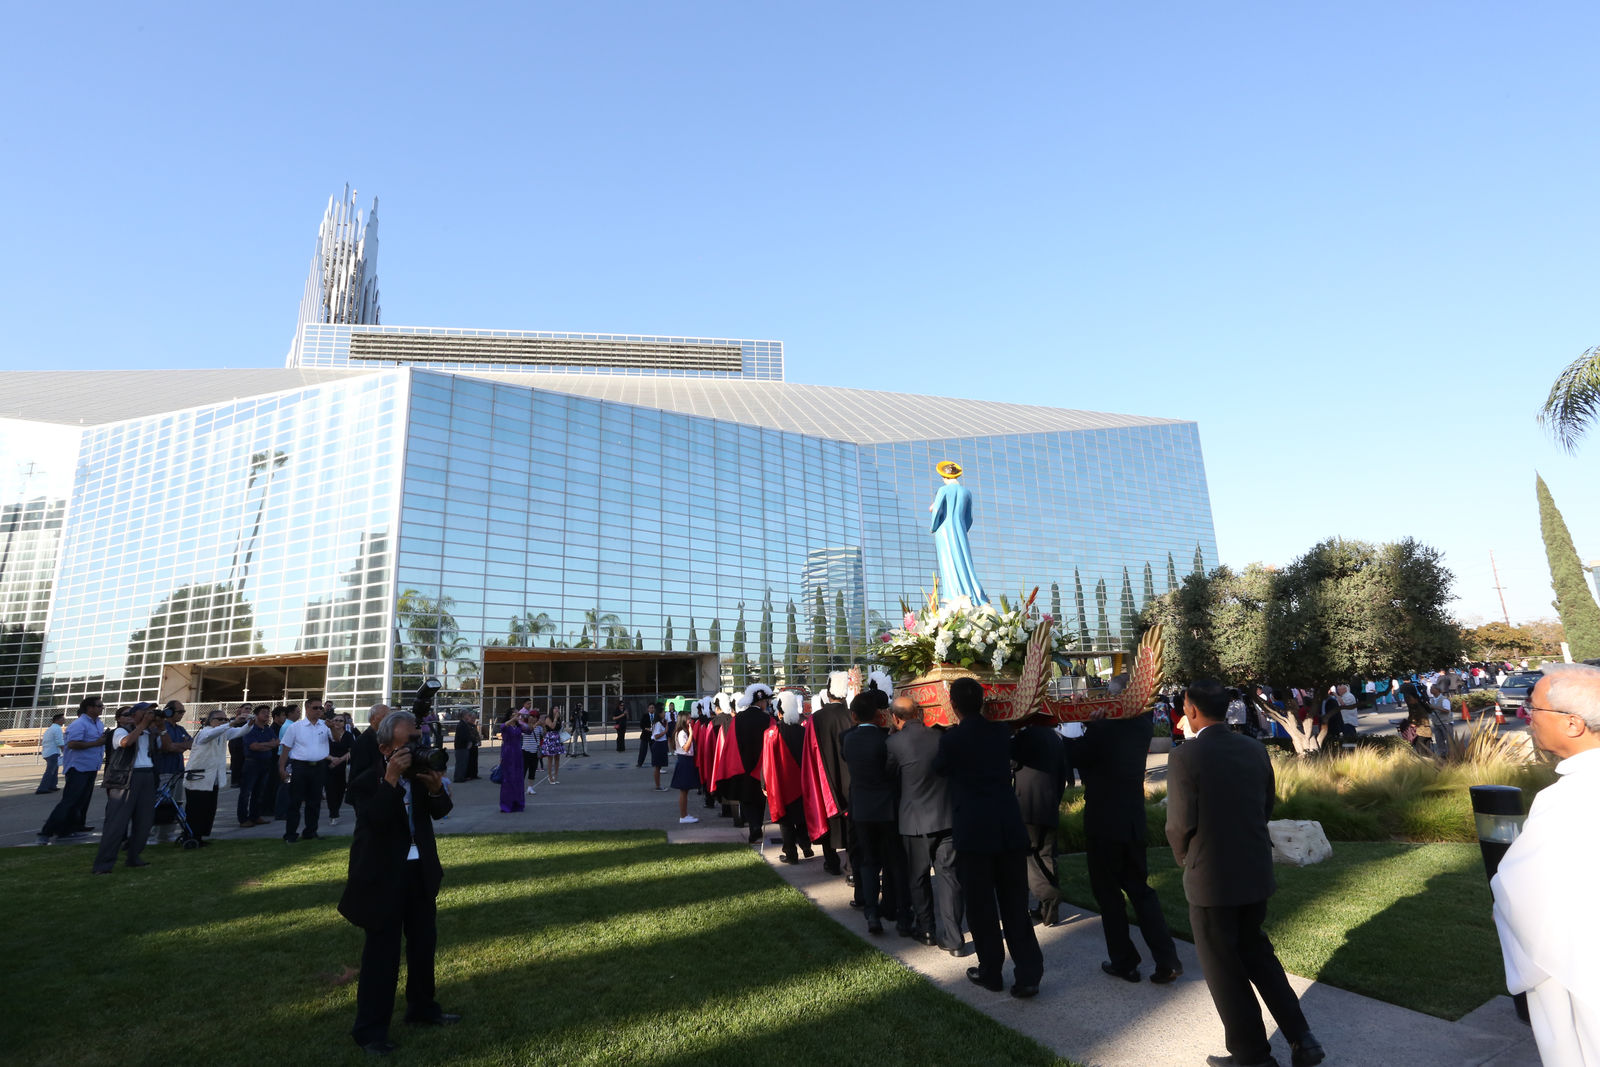 On Saturday, Oct. 21, 2017, approximately 3,000 faithful gathered on Christ Cathedral Campus for the blessing of the site of the future Our Lady of La Vang Shrine. Photo courtesy Diocese of Orange.